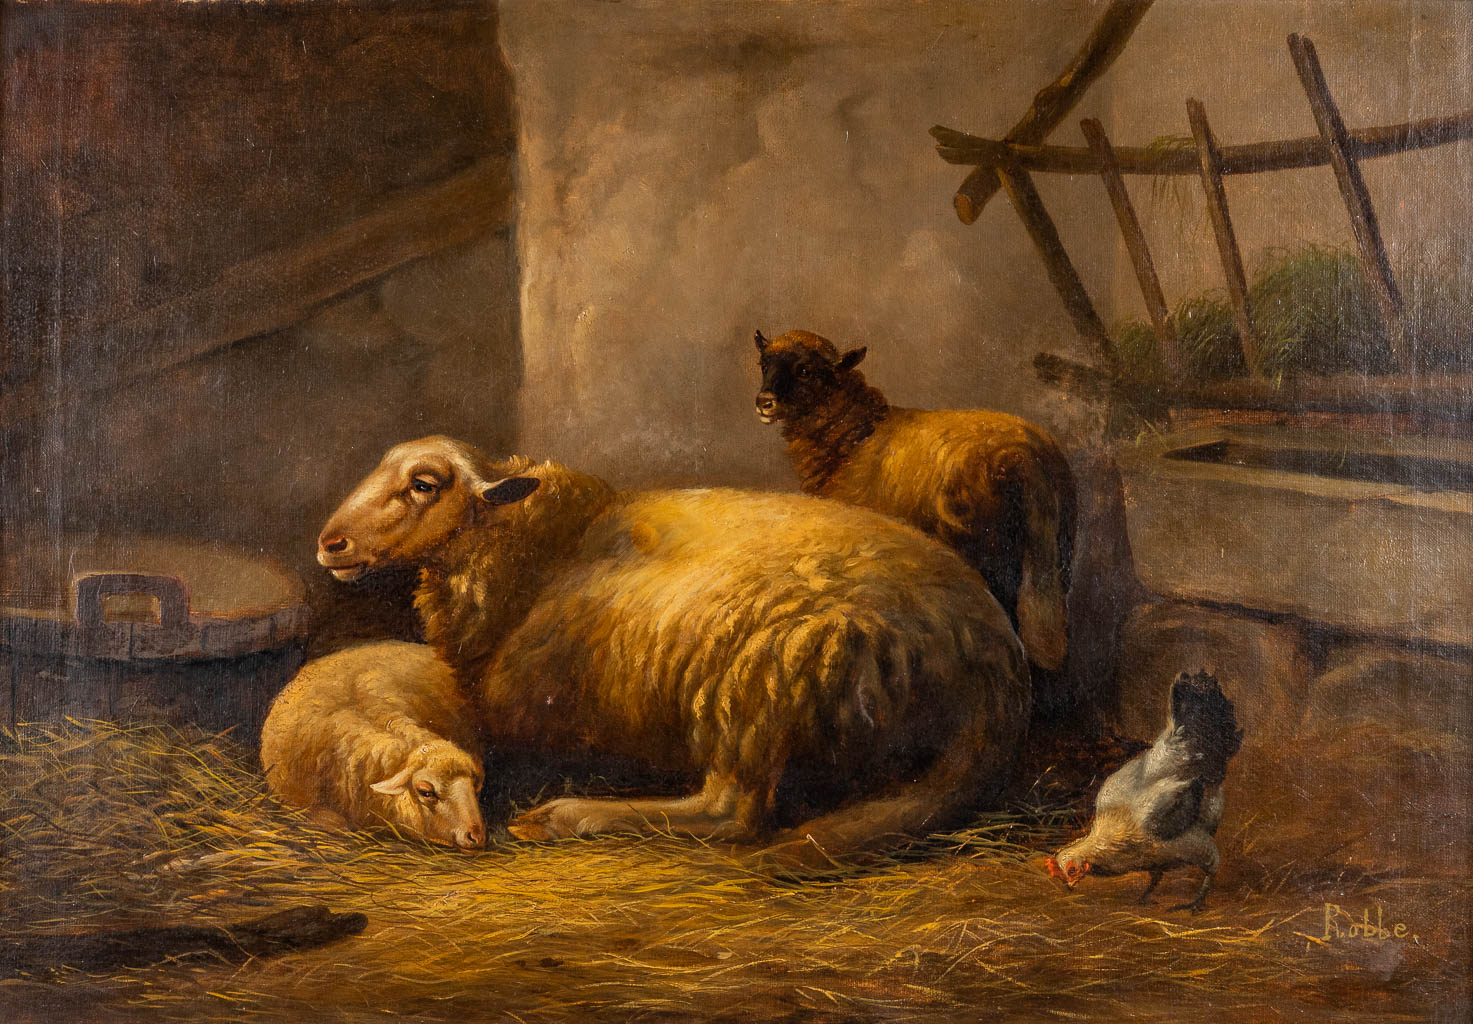 Louis ROBBE (1806-1887) 'Sheep in the barn' oil on canvas. (W:74 x H:52 cm)